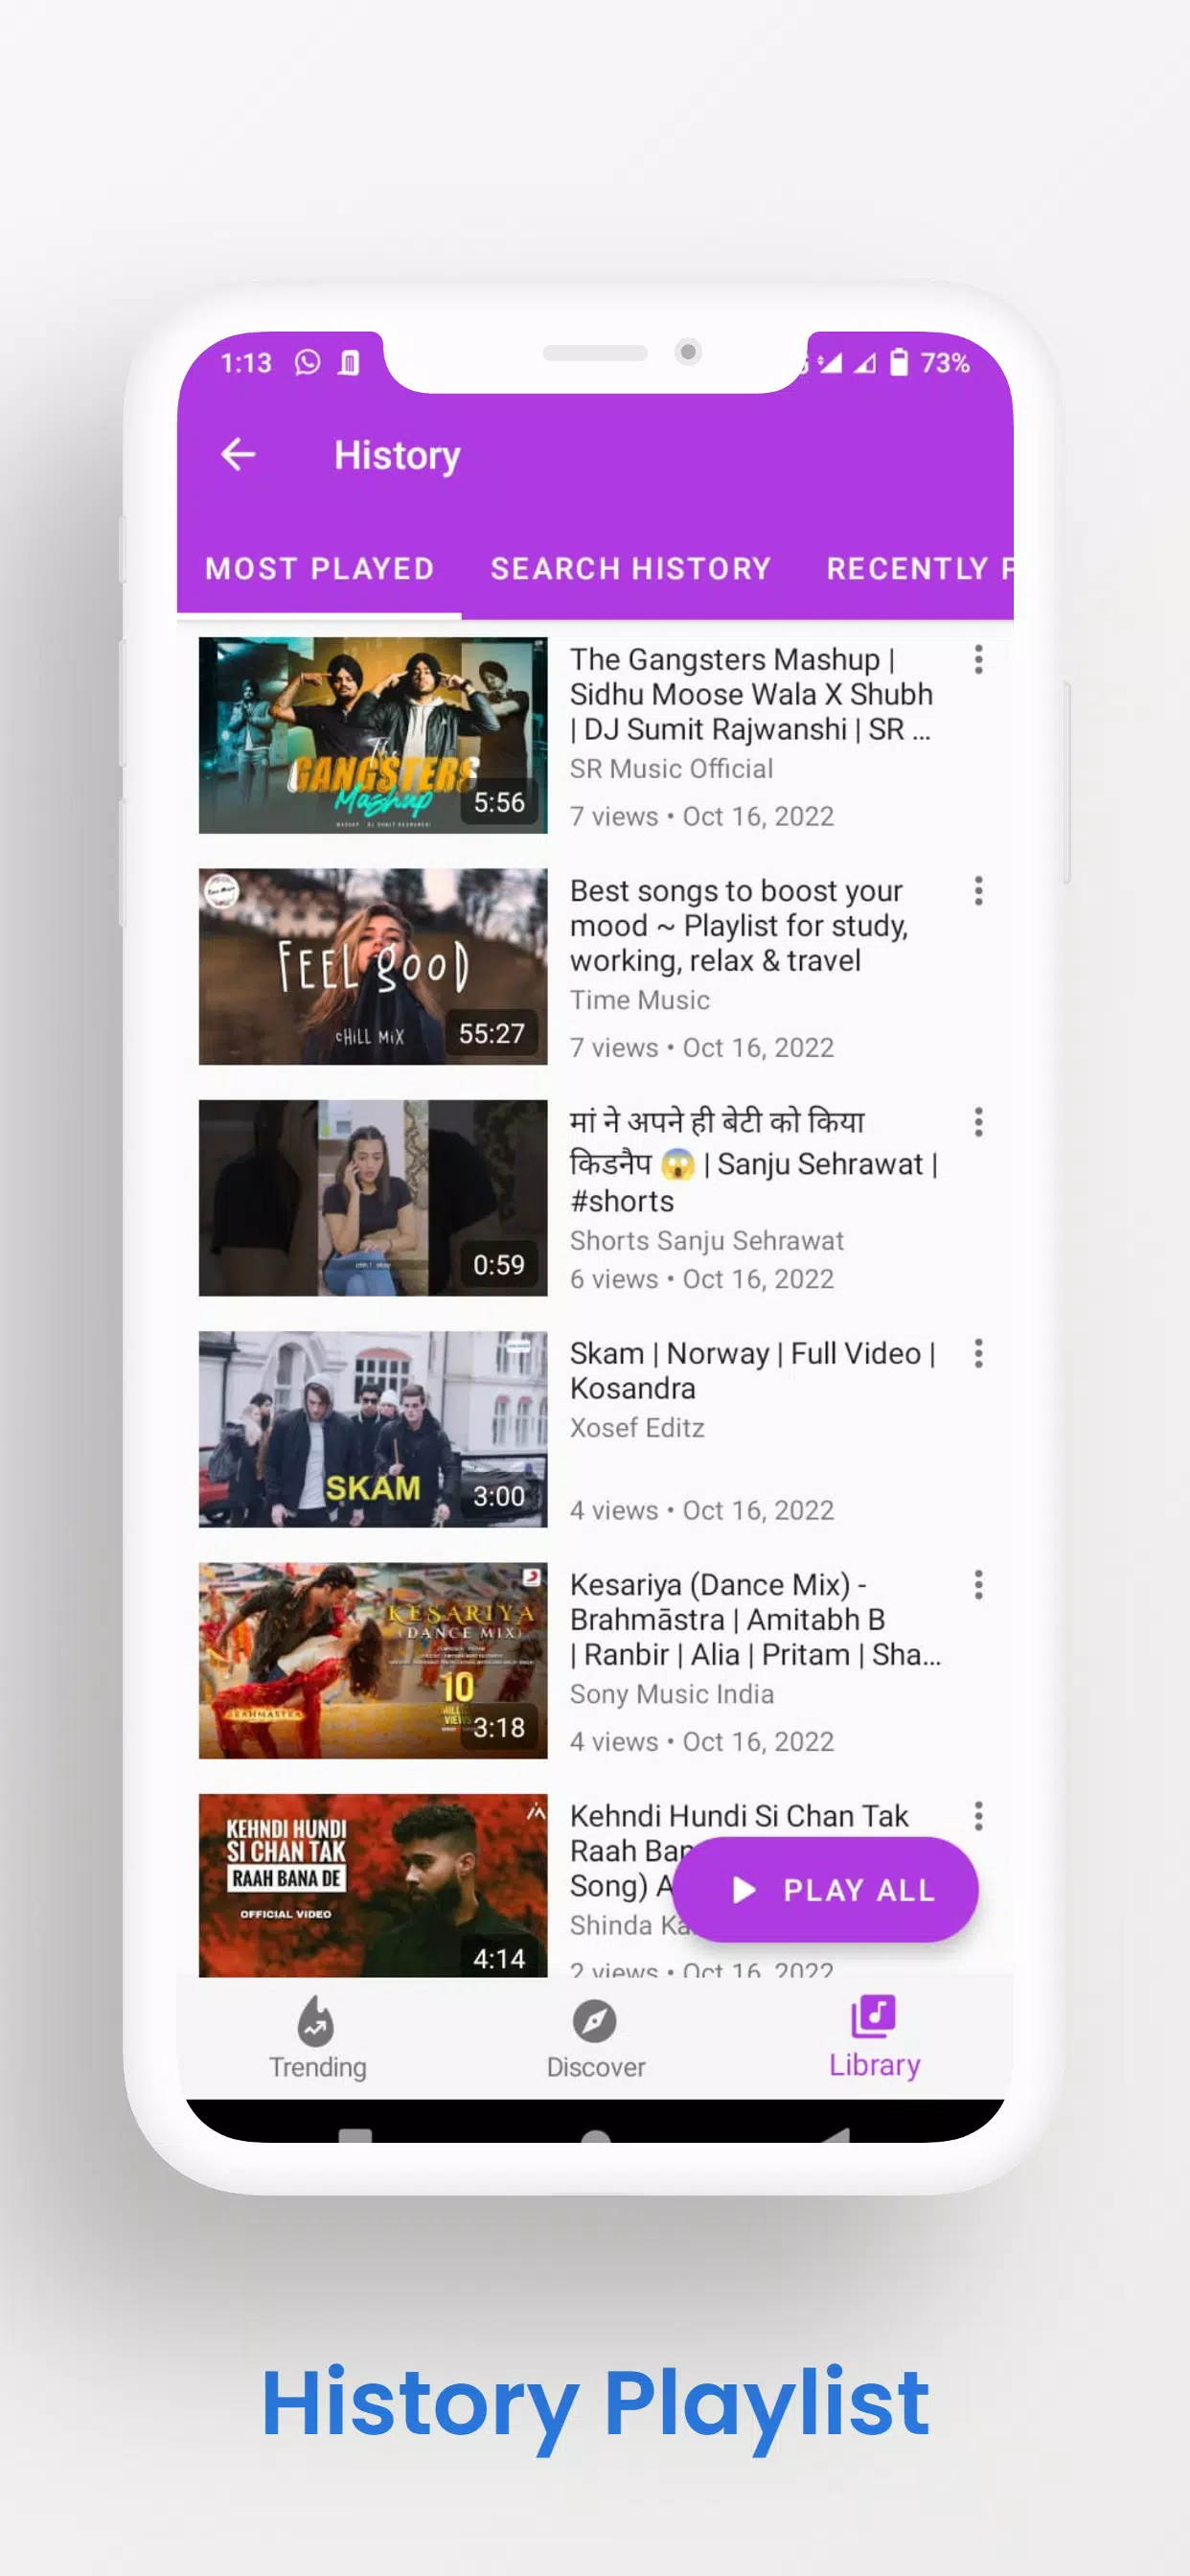 DailyTube - Block Ads Tube APK for Android - Download